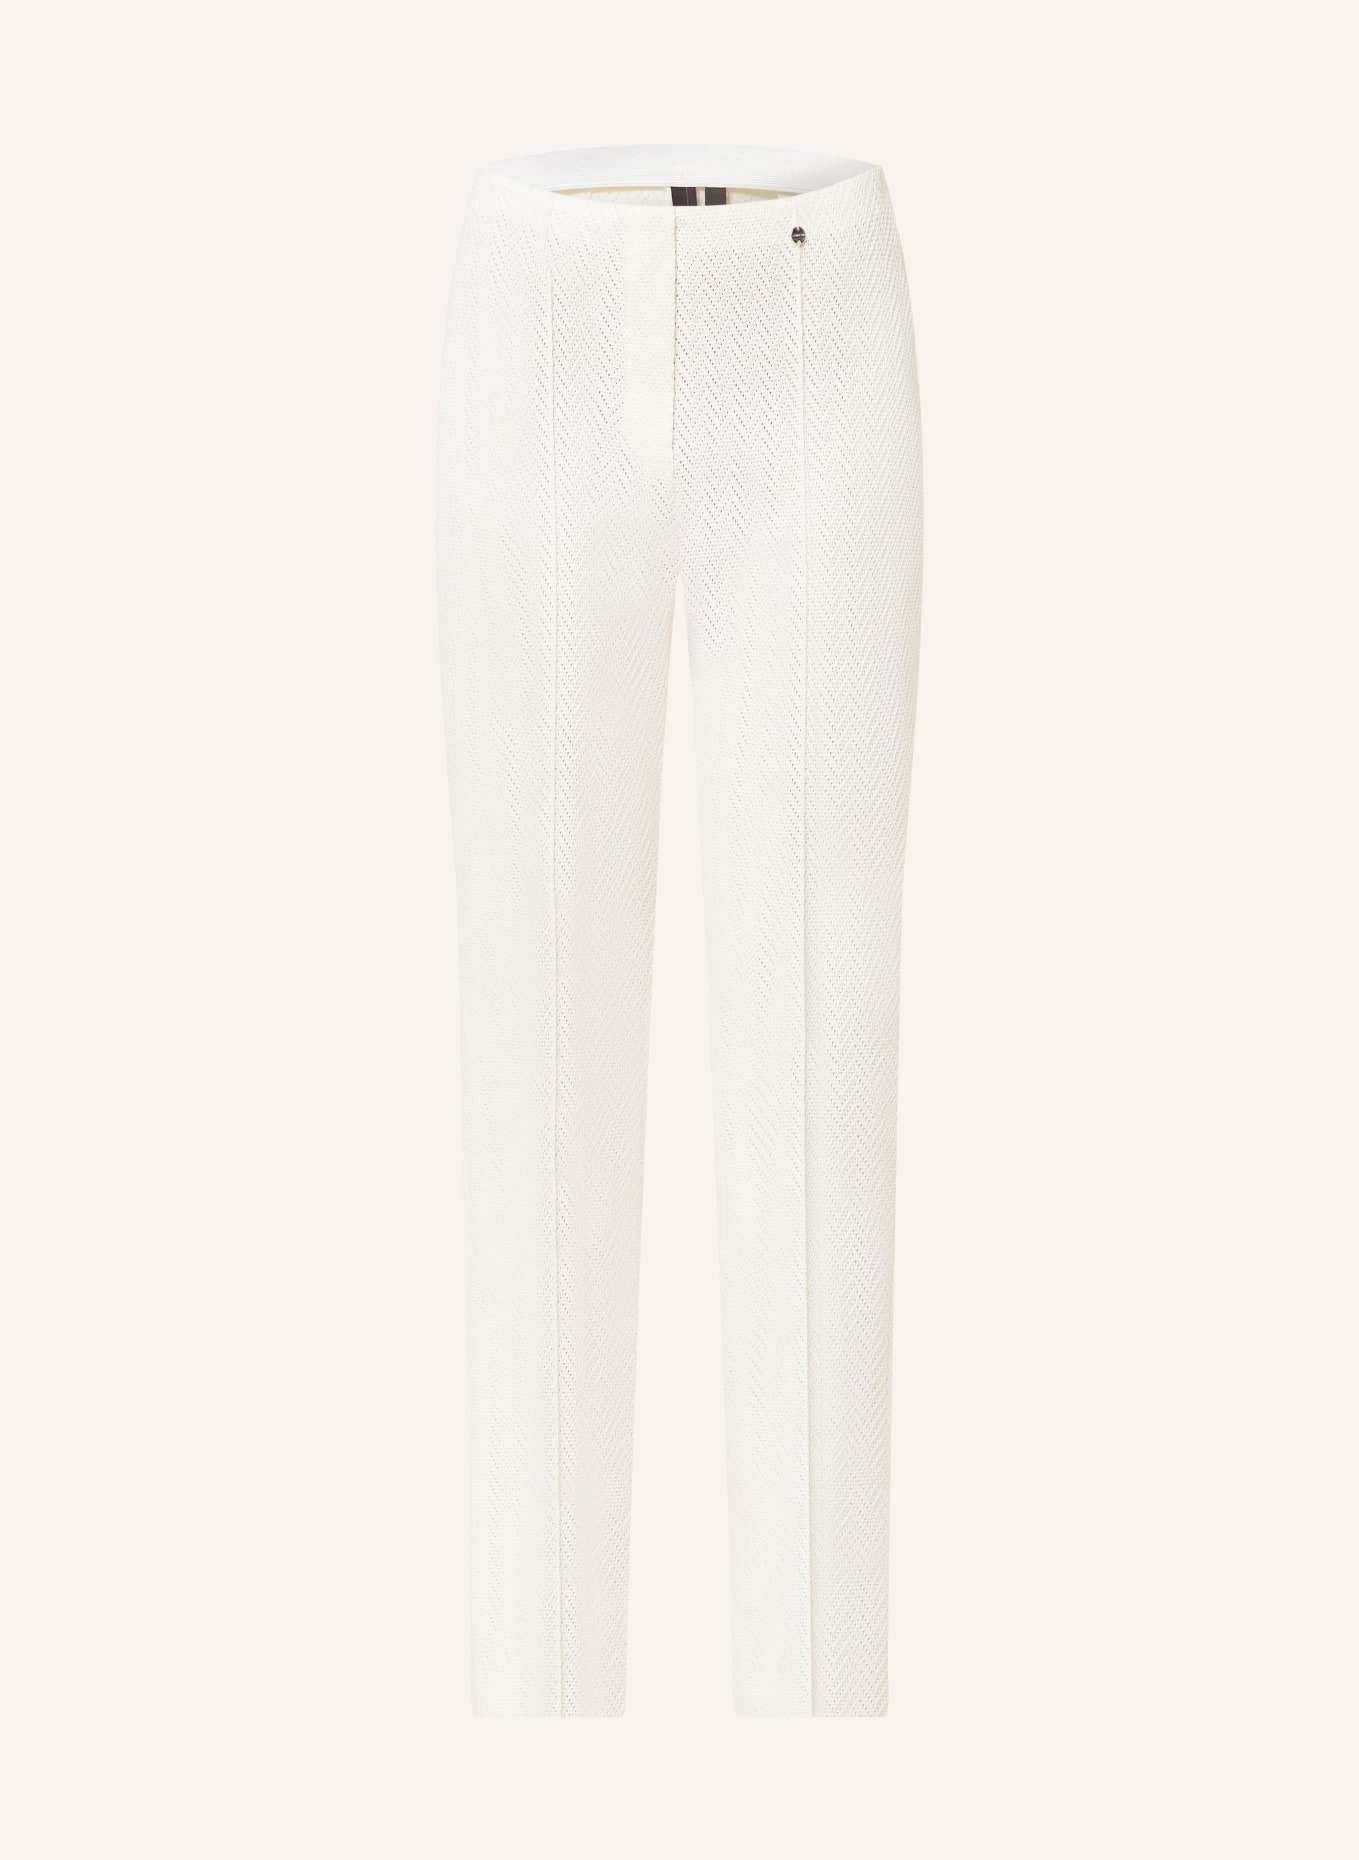 MARC CAIN Knit trousers FREDERICA, Color: 110 off (Image 1)